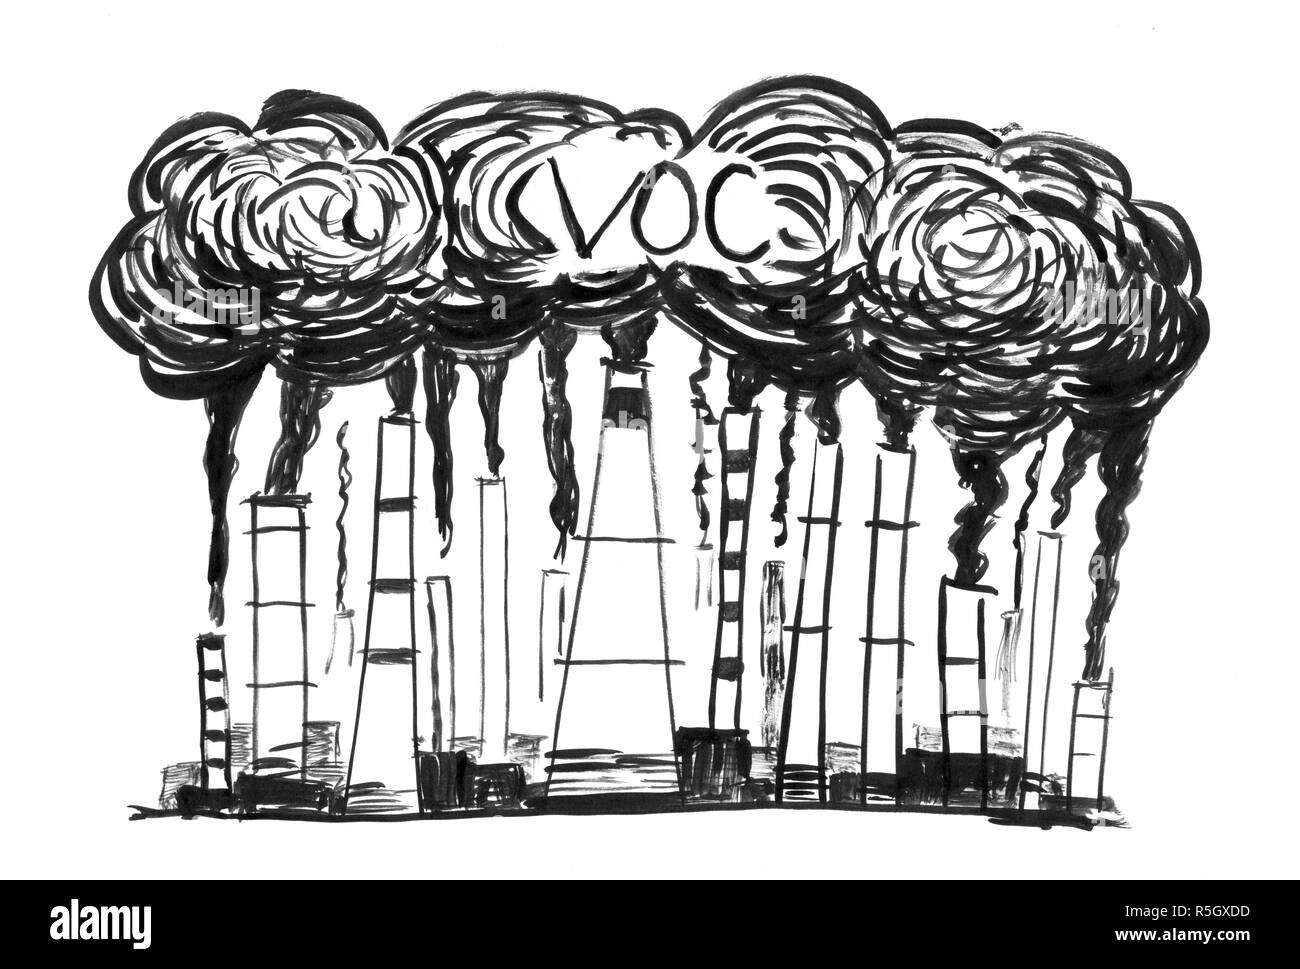 Black Ink Grunge Hand Drawing of Smoking Smokestacks, Concept of Industry or Factory Volatile Organic Compounds Air Pollution Stock Photo